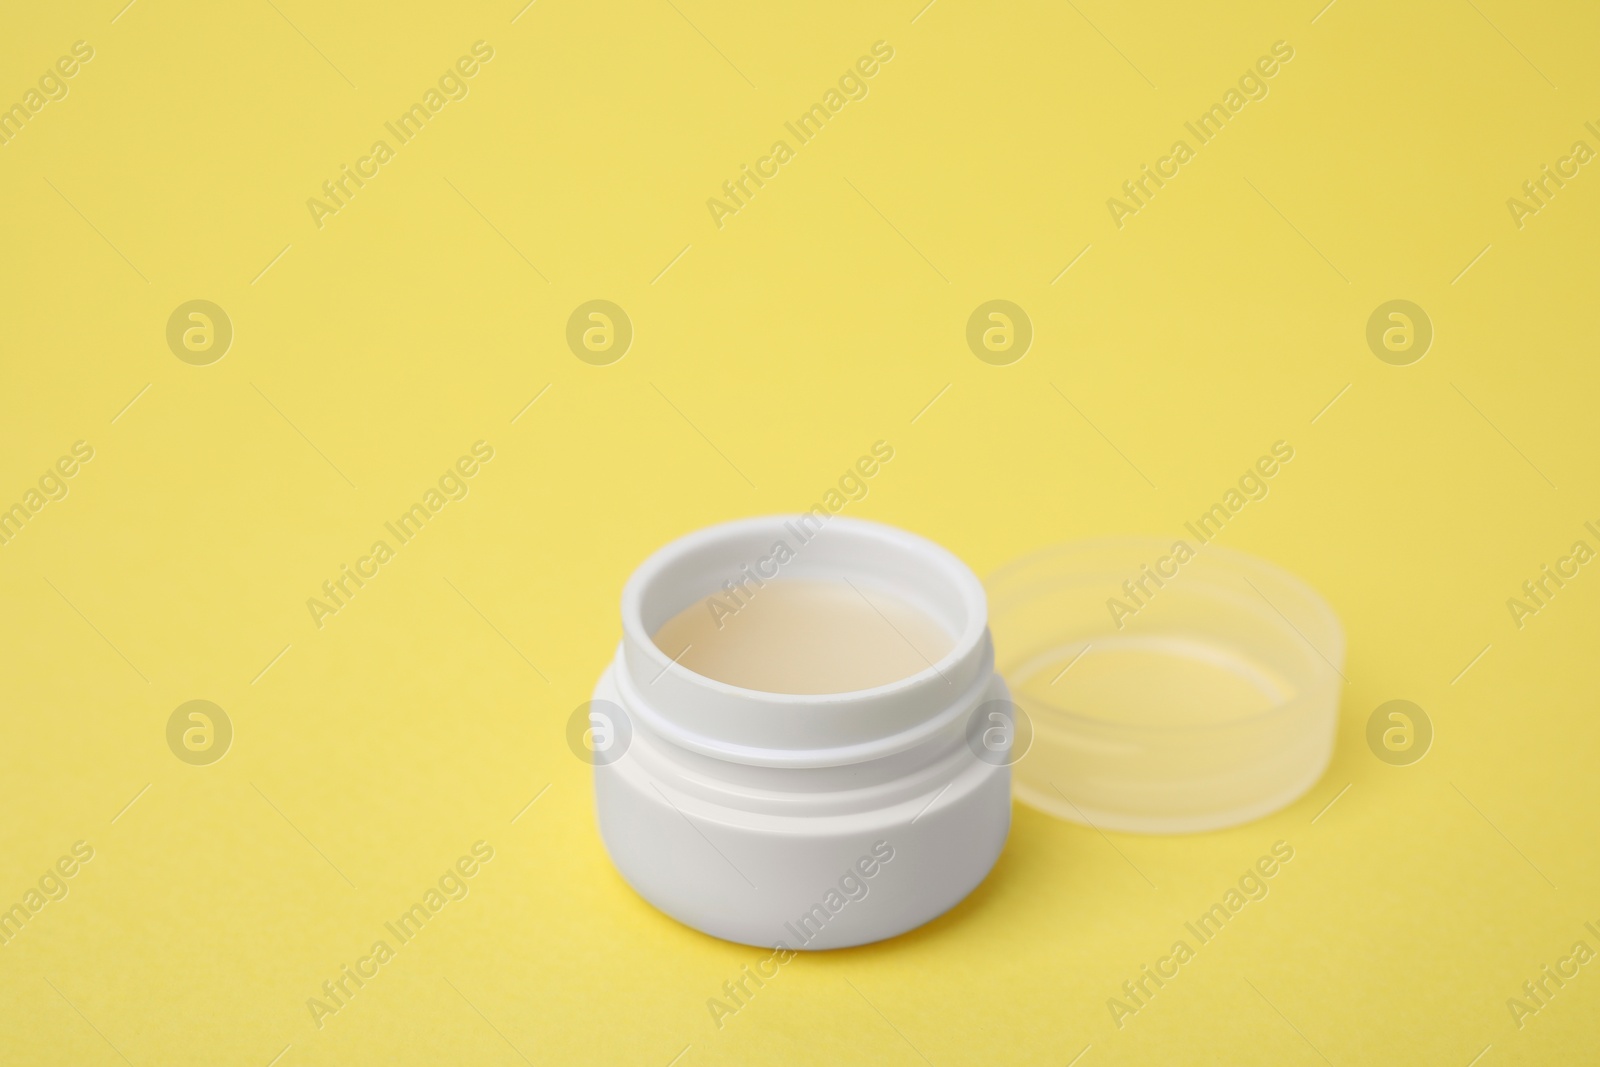 Photo of Jar of petroleum jelly on yellow background